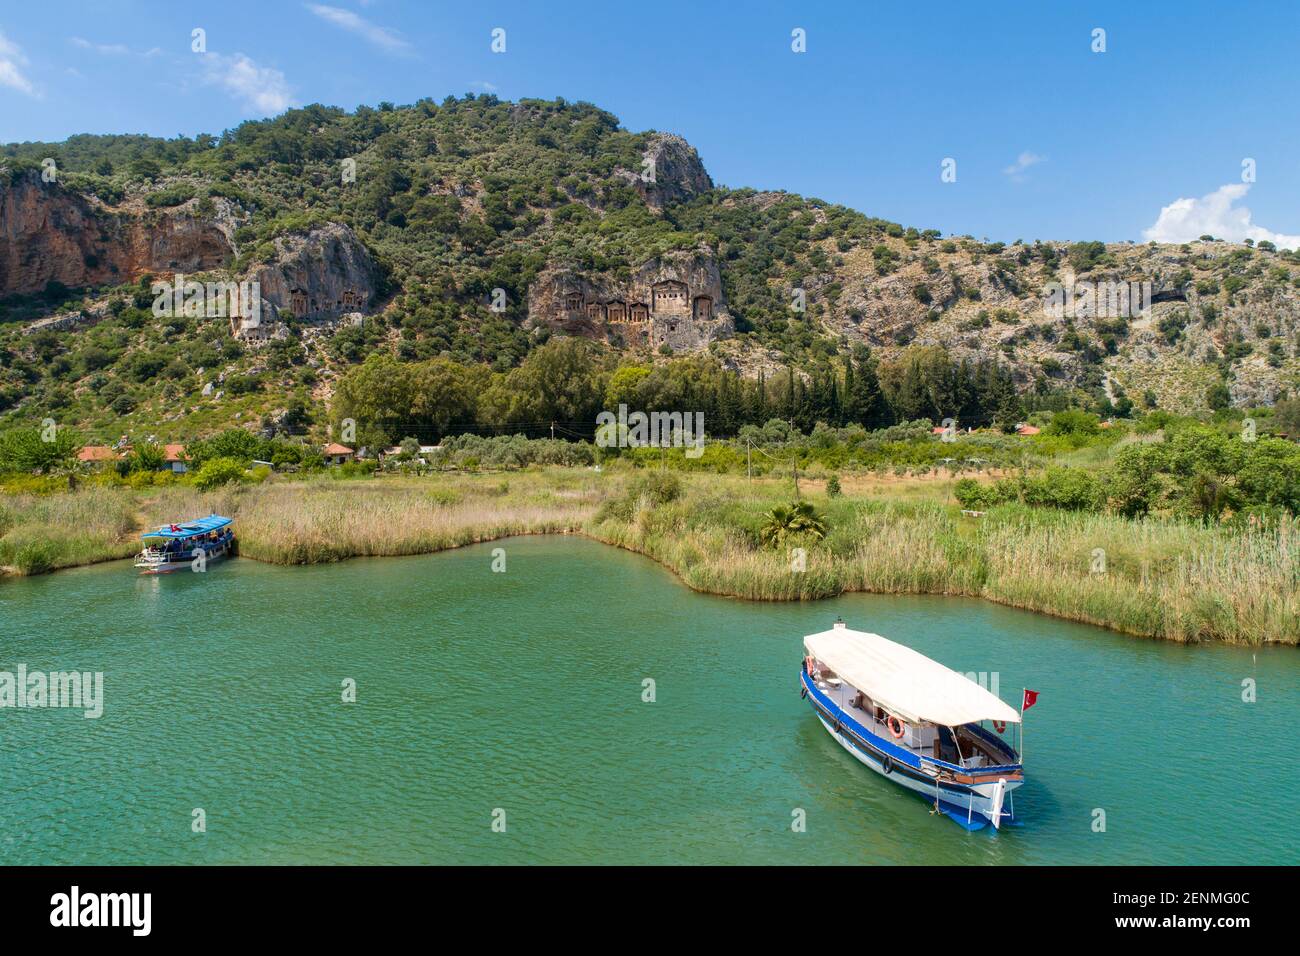 Aerial view of boats on Dalyan River with ancient Lycian rock tombs (Tombs of the Kings) in the background, Dalyan, Province of Muğla, Turkey Stock Photo